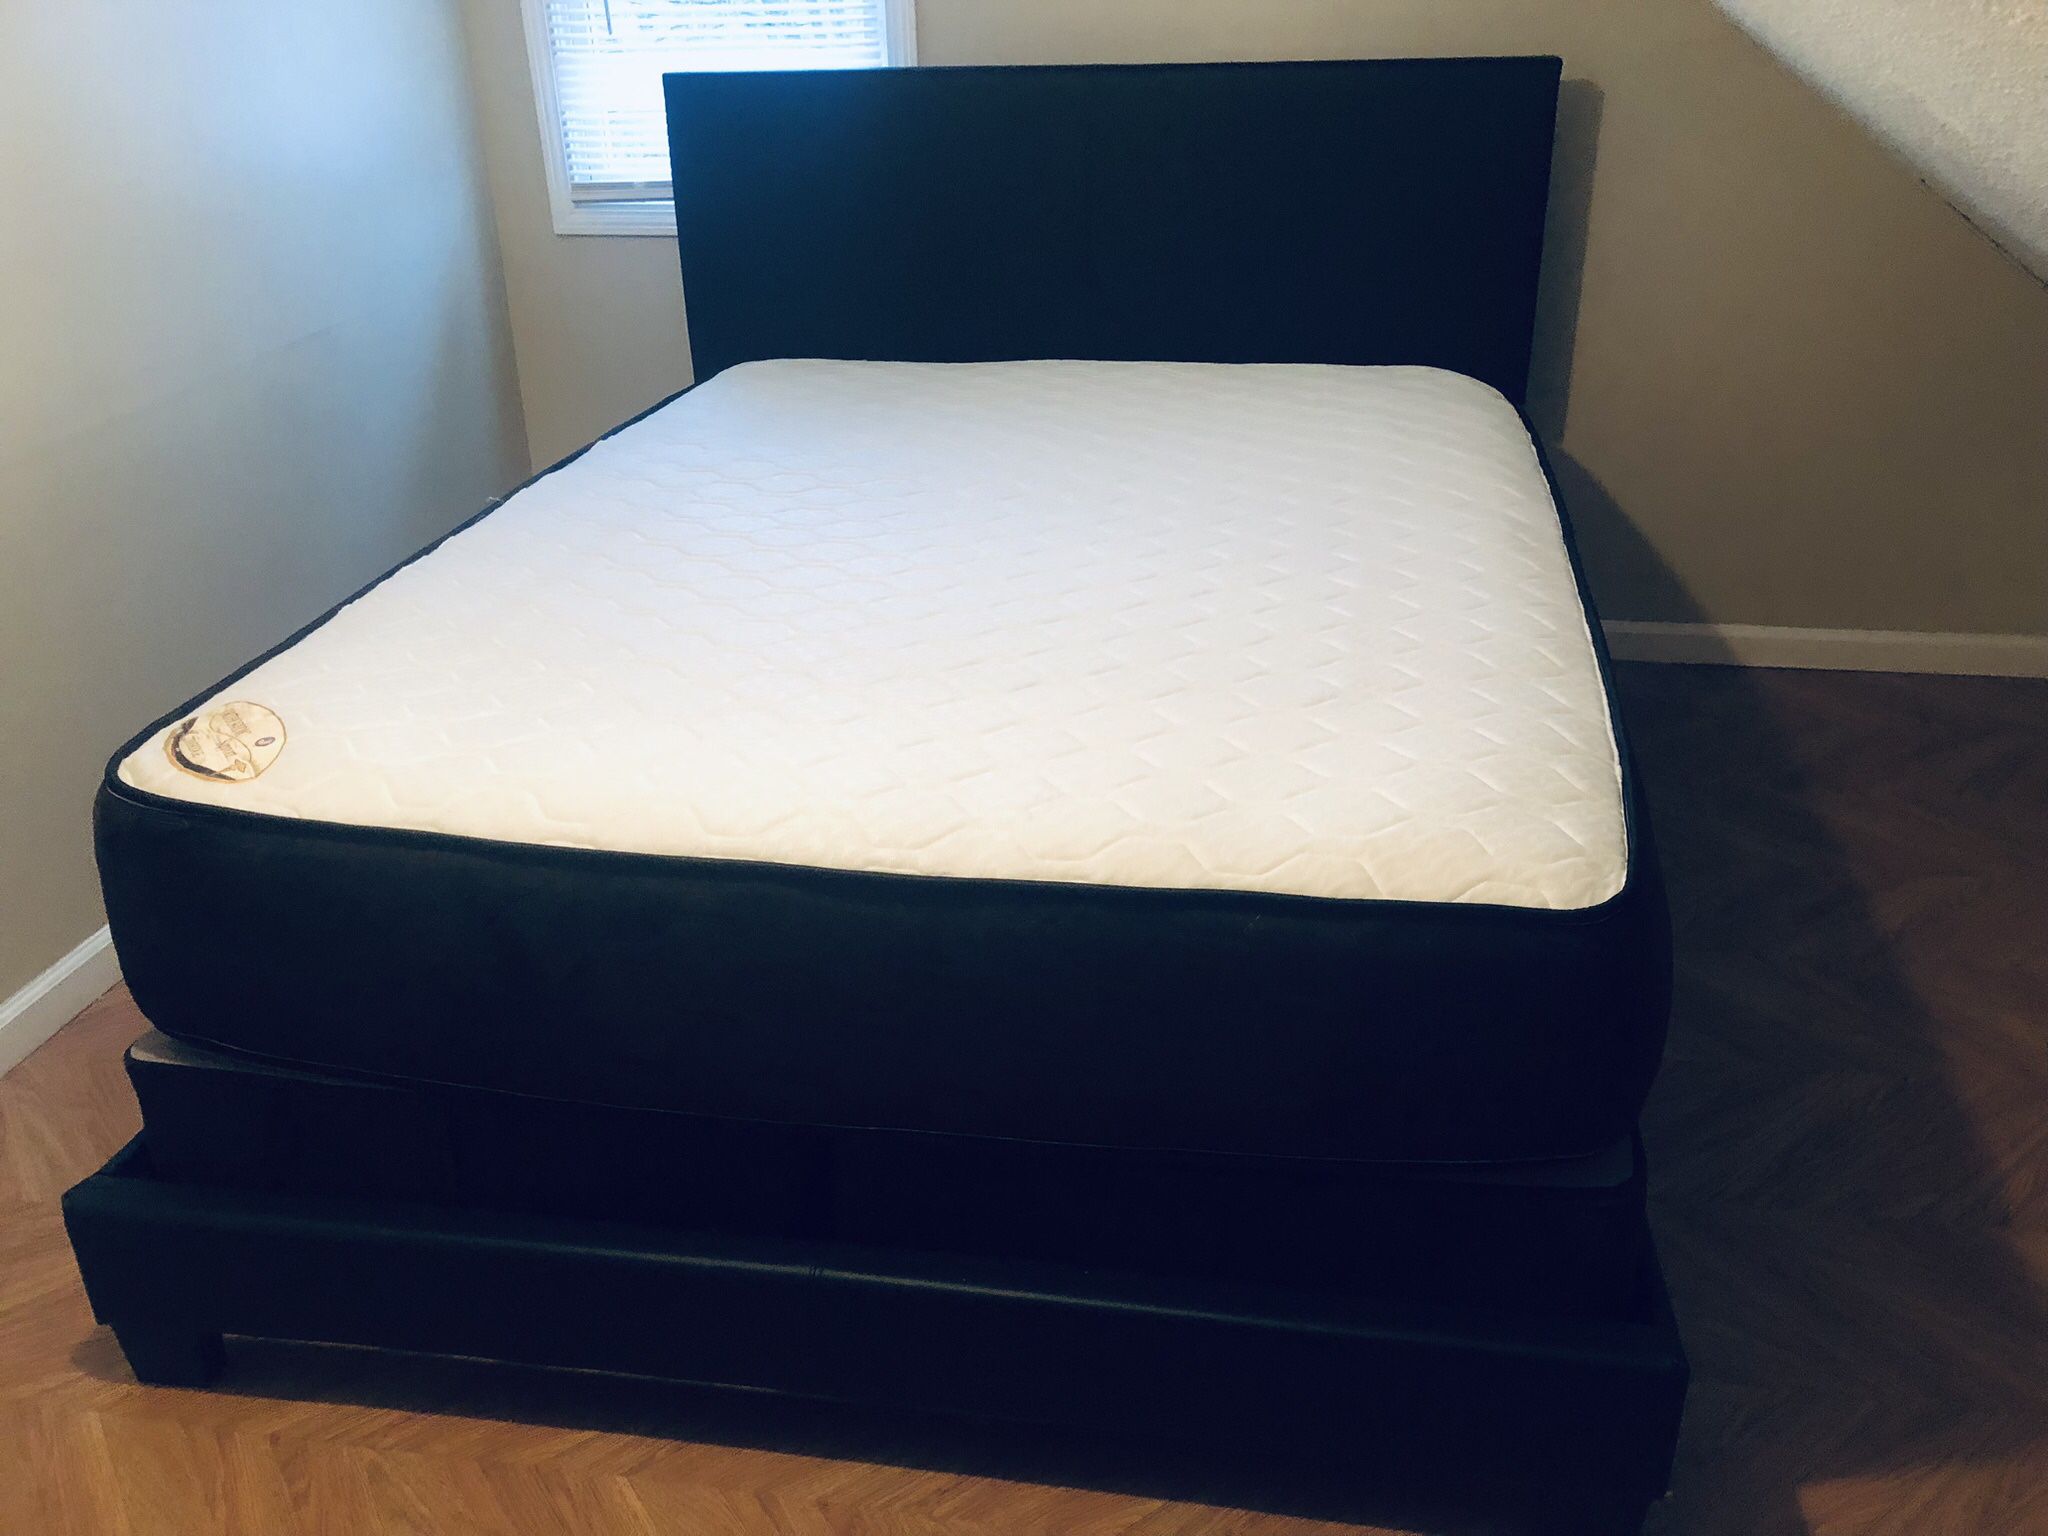 Queen size mattres Foam 11”thick+Regular box spring+Bed frame Brand new. We Finance we deliver